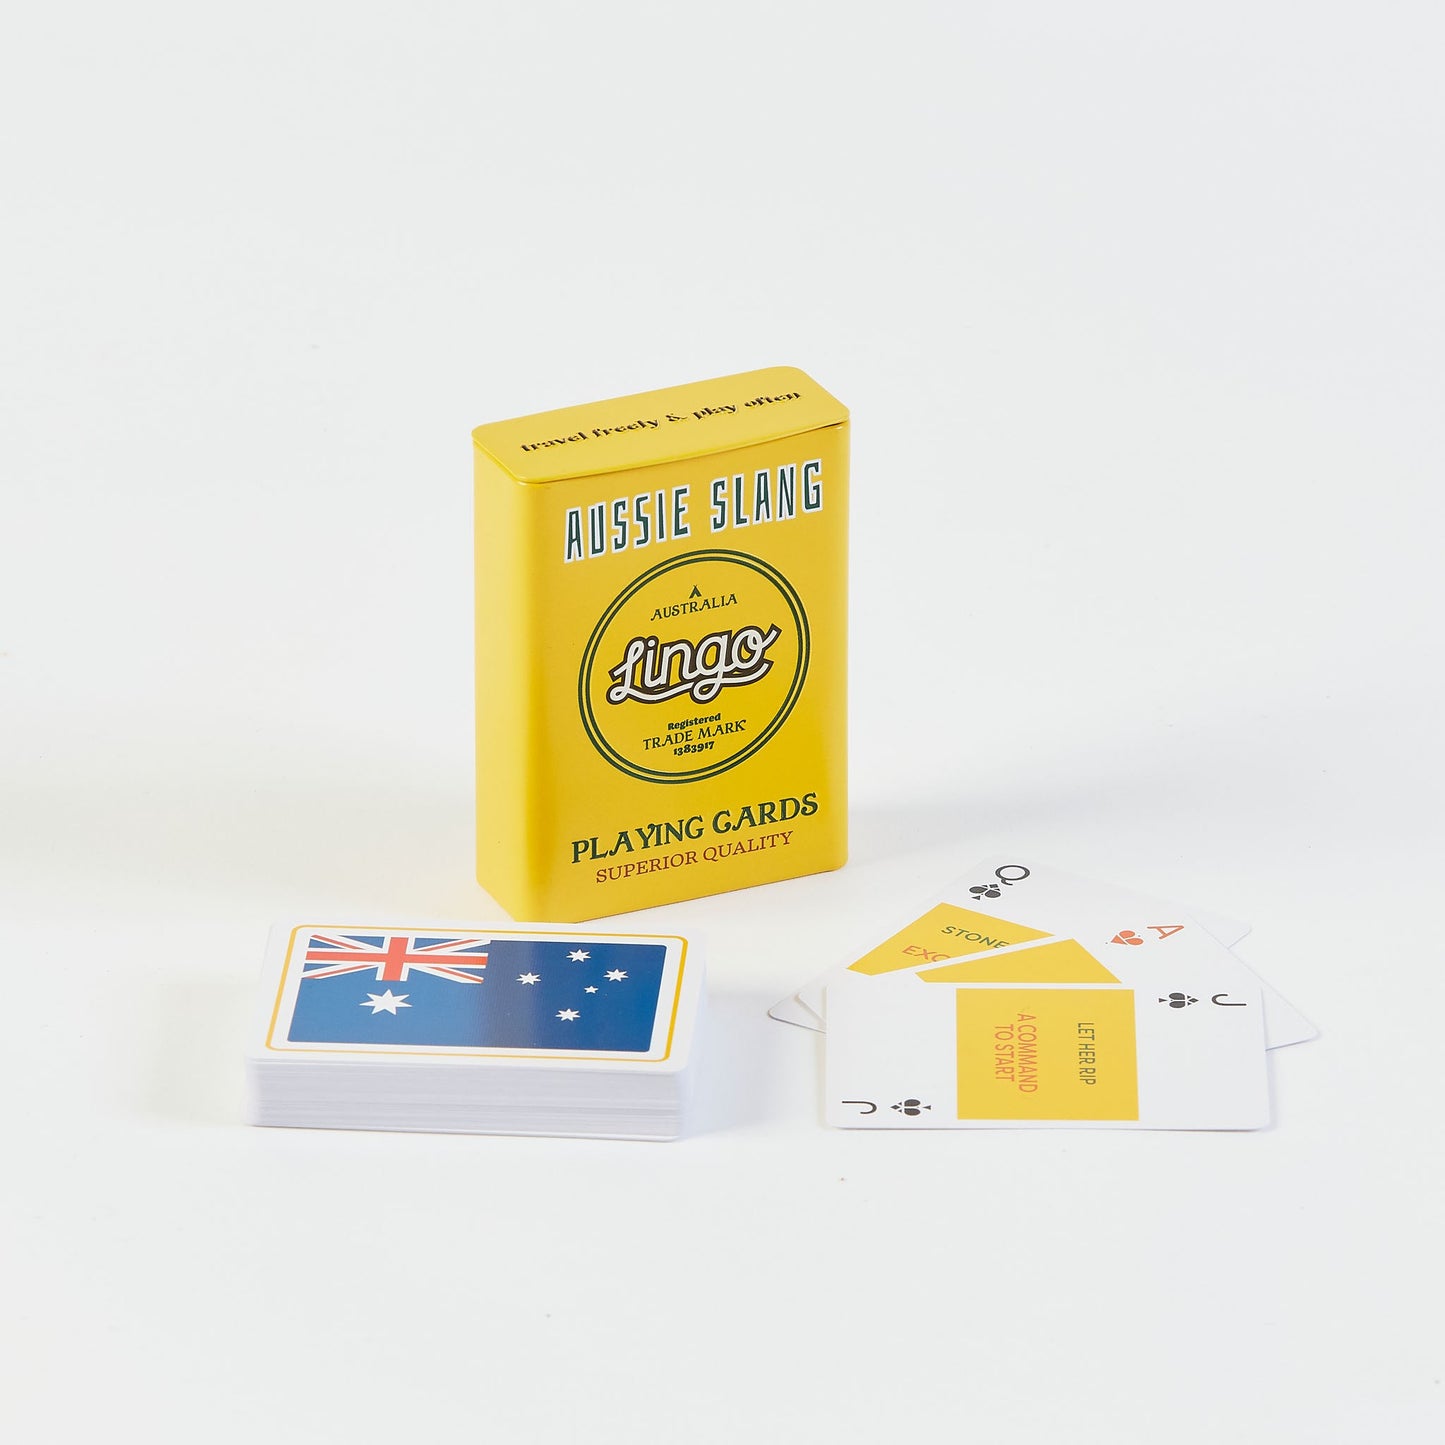 Lingo Playing Cards - Aussie Slang